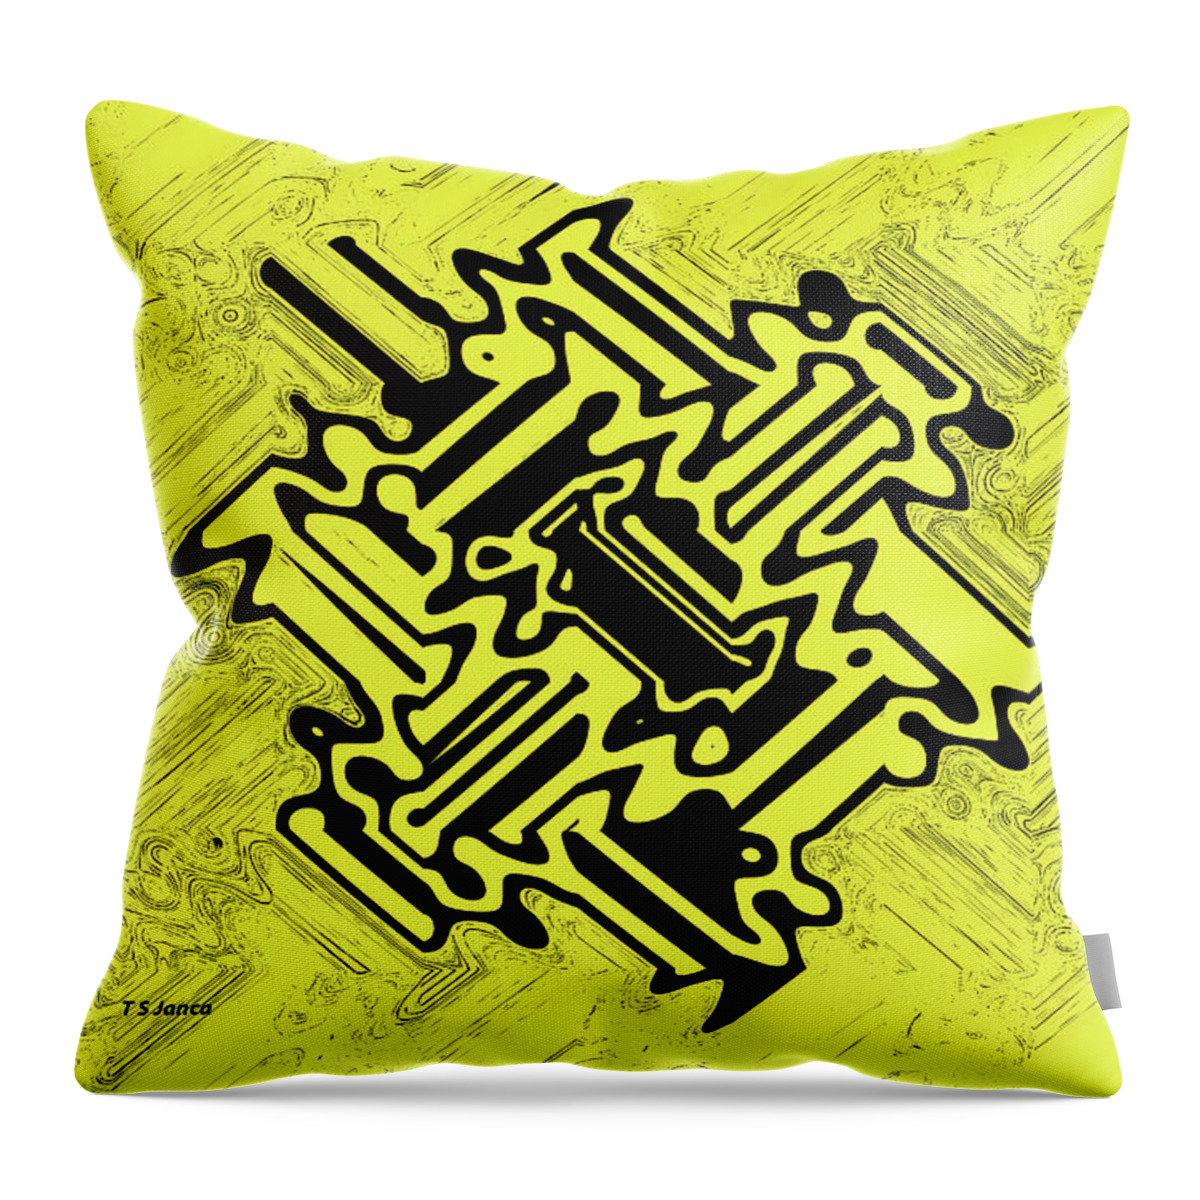 Spare Part For Time-machine Throw Pillow featuring the digital art Spare Part For Time-machine by Tom Janca